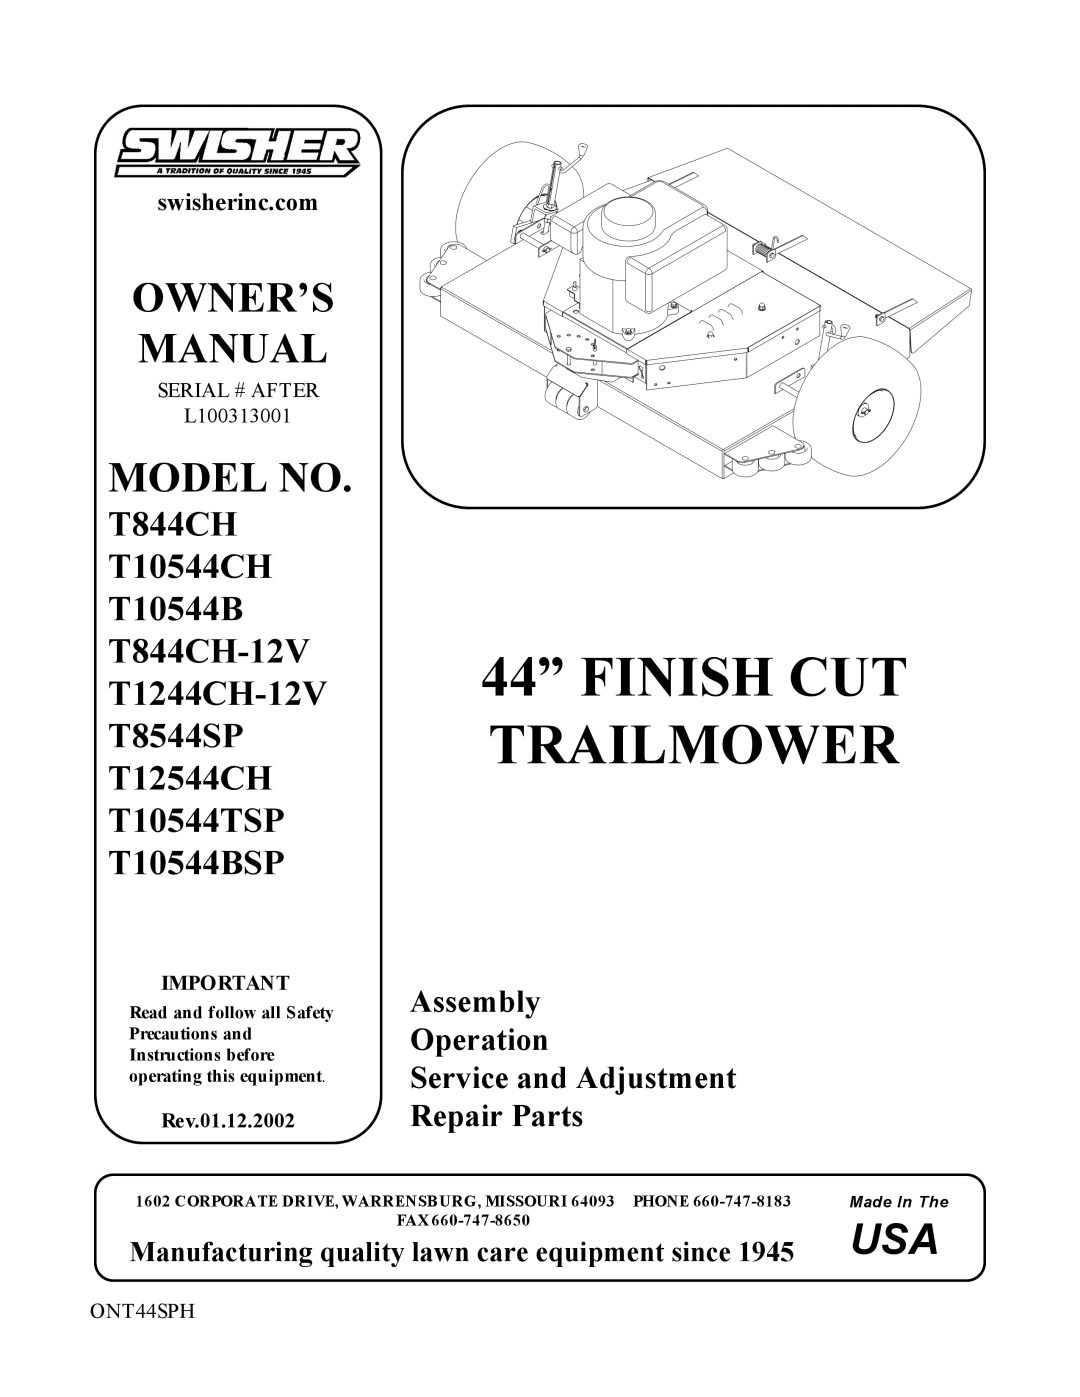 Swisher T12544CH owner manual Model No, T844CH T10544CH, SERIAL # AFTER L100313001, Rev.01.12.2002, ONT44SPH, Made In The 